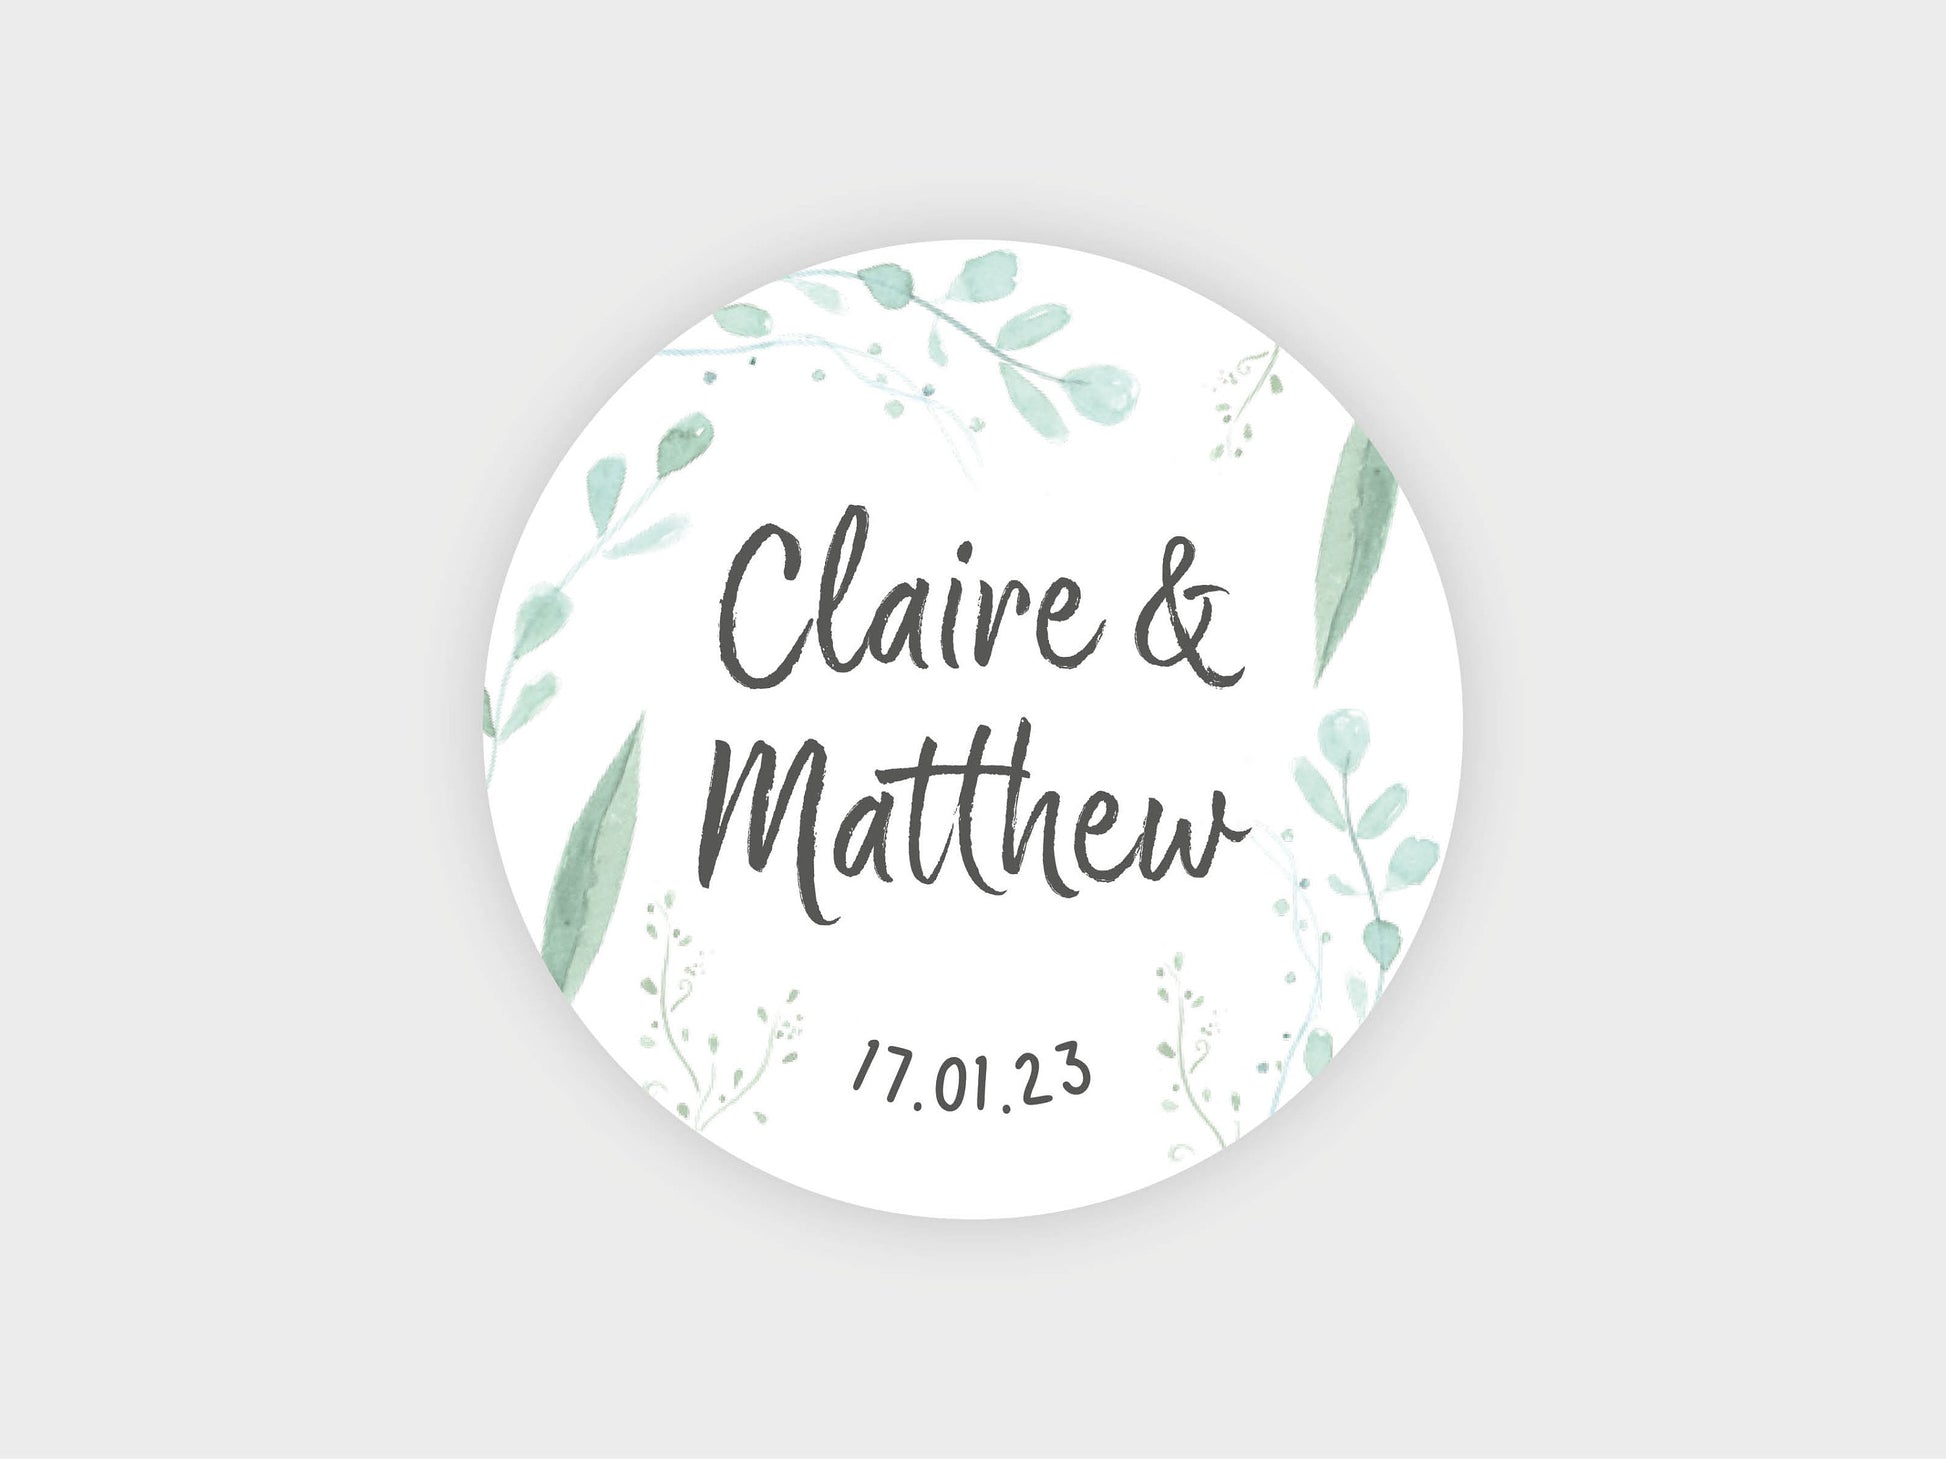 Wedding sticker | Personalised with your names and wedding date VA210